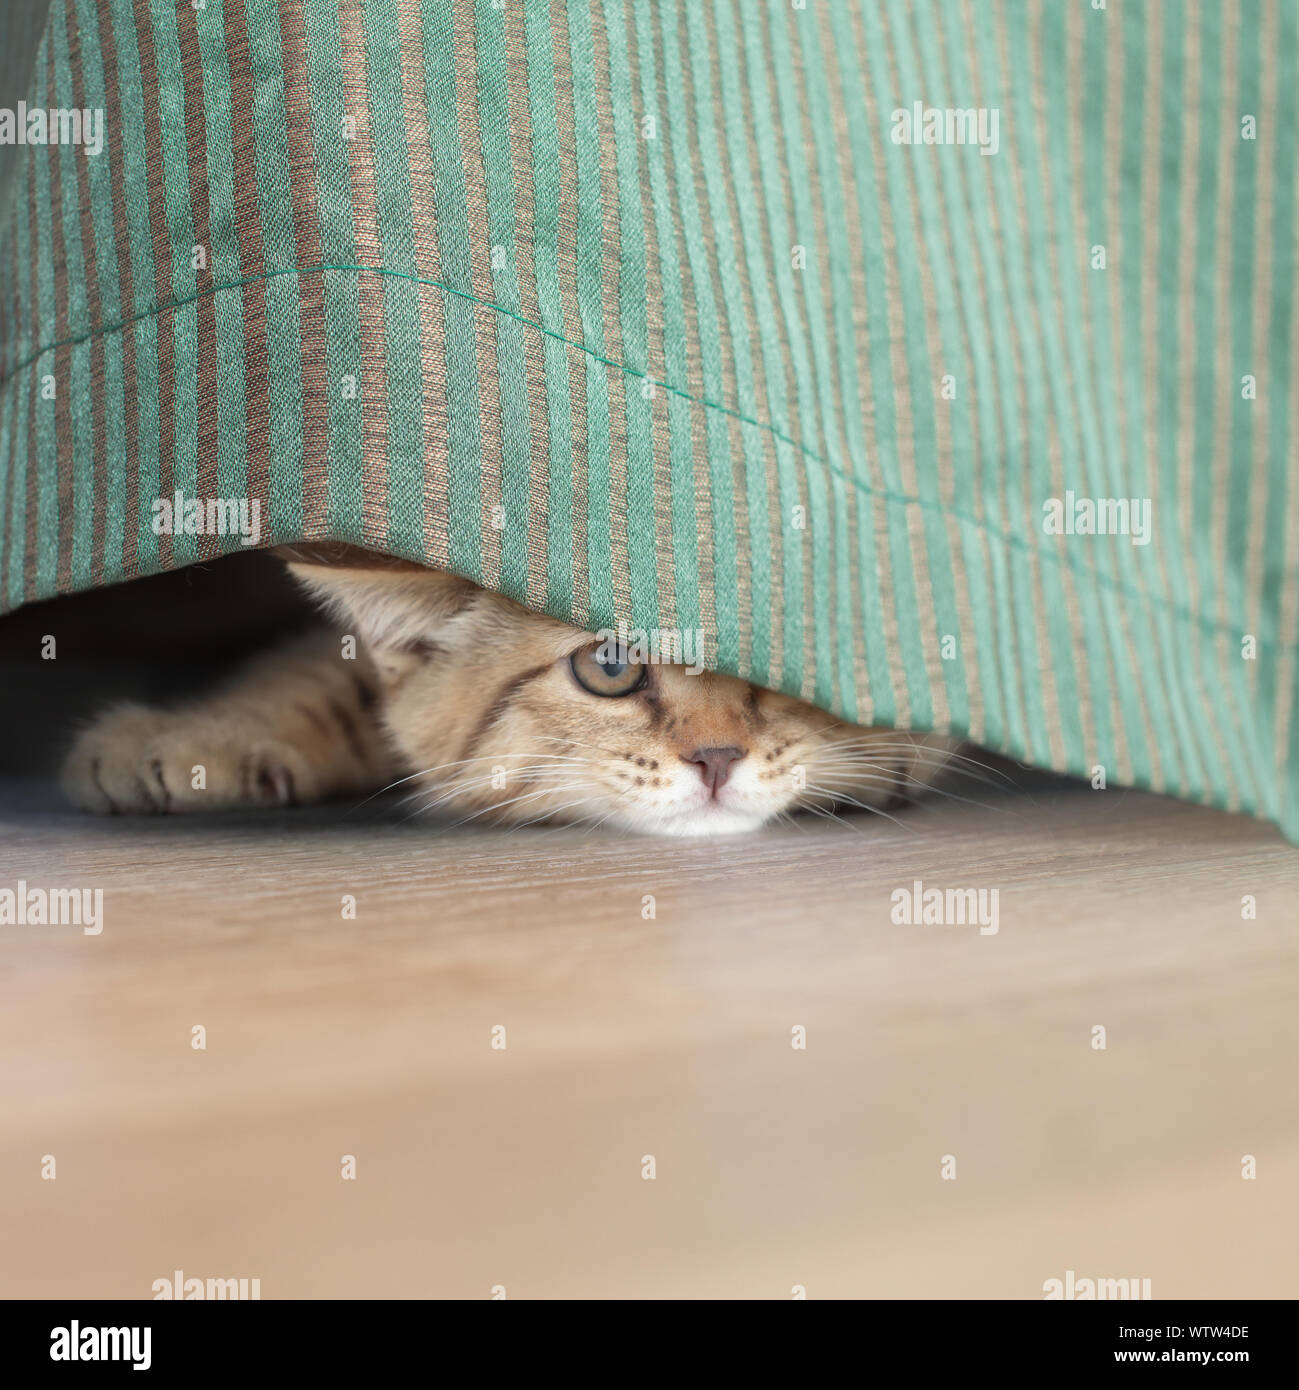 funny cat stealing behind green curtain Stock Photo